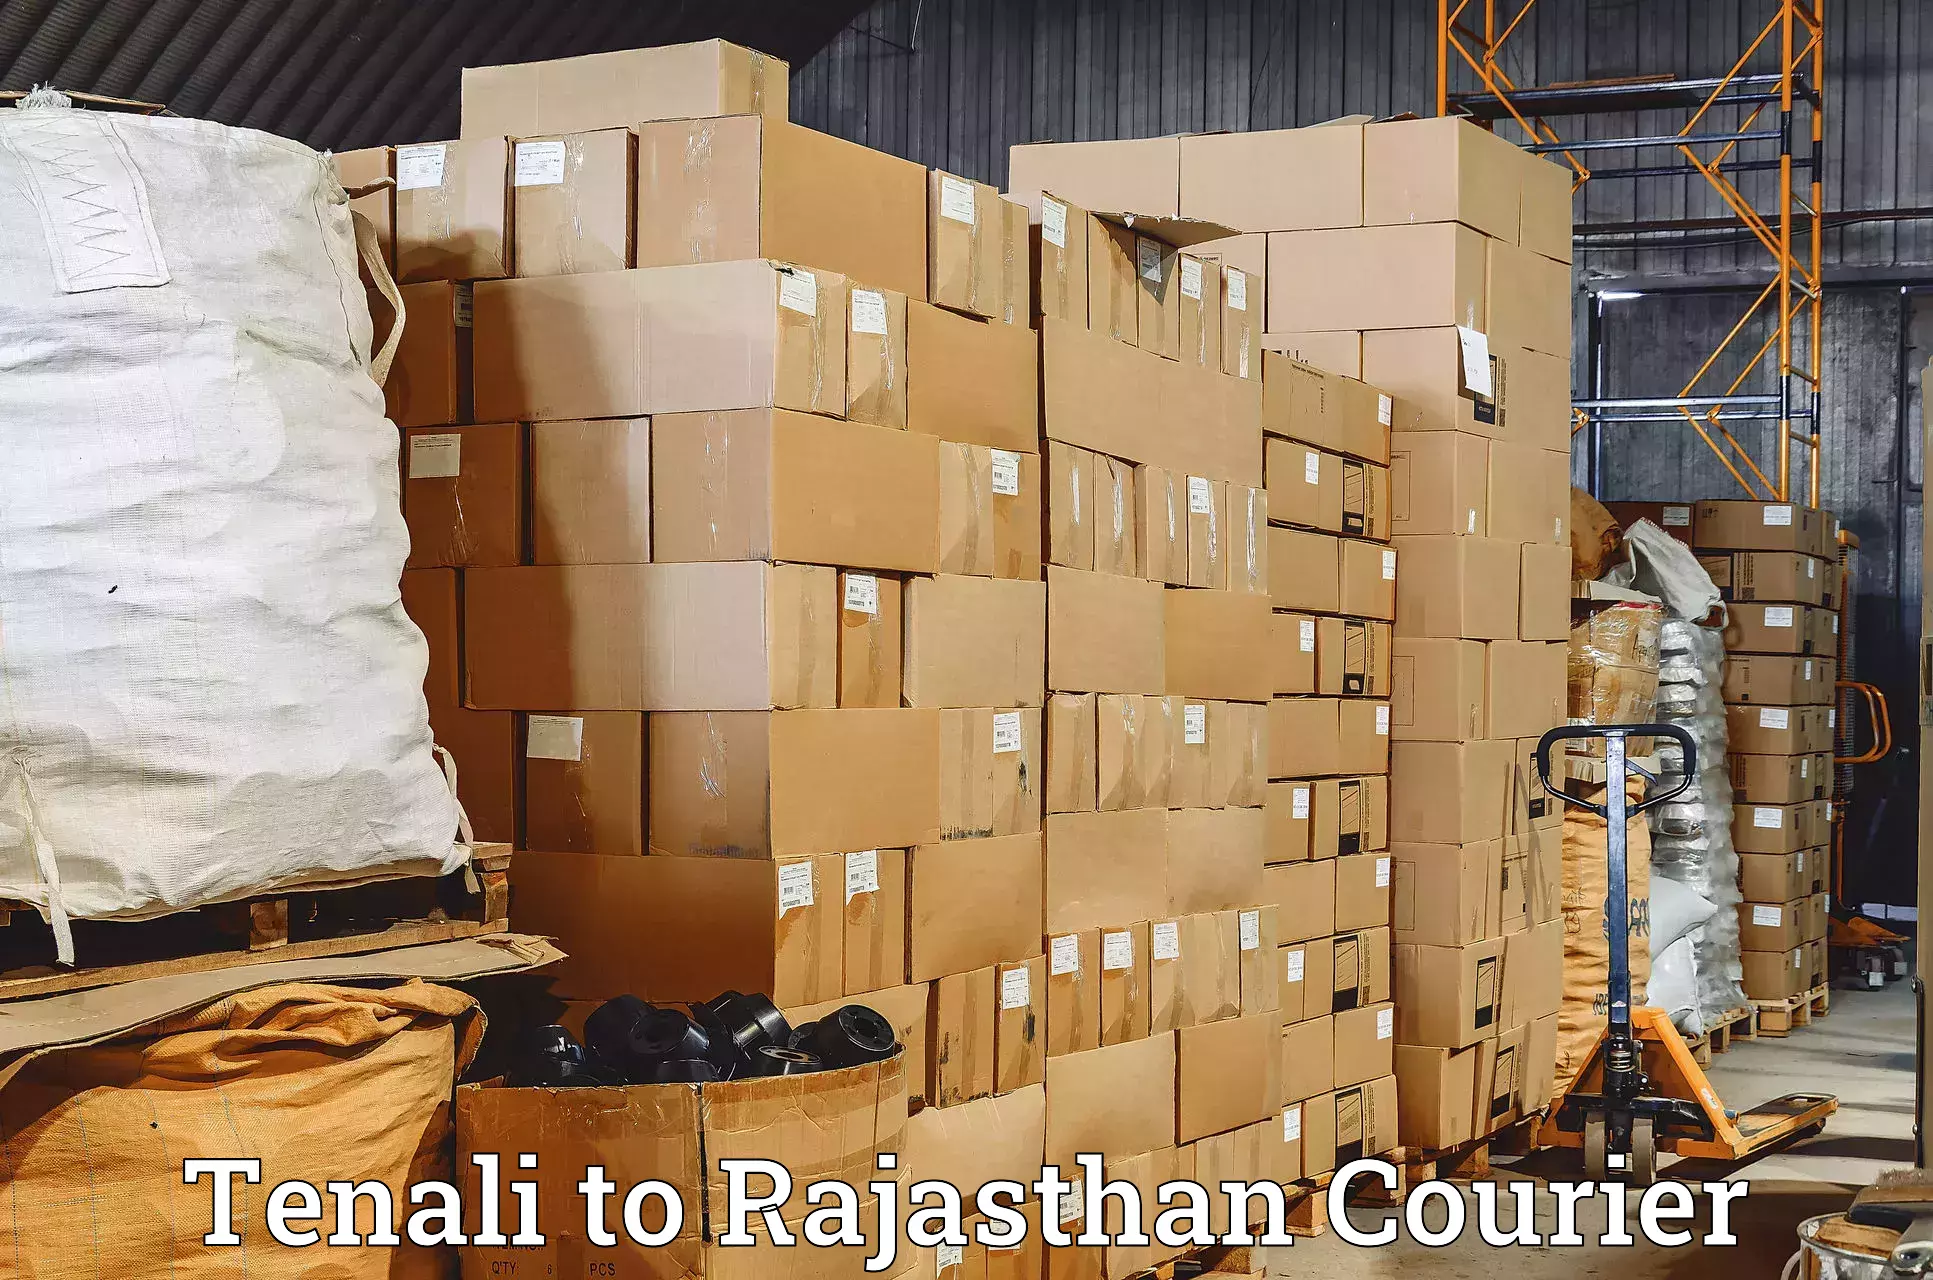 Global courier networks Tenali to Rajasthan